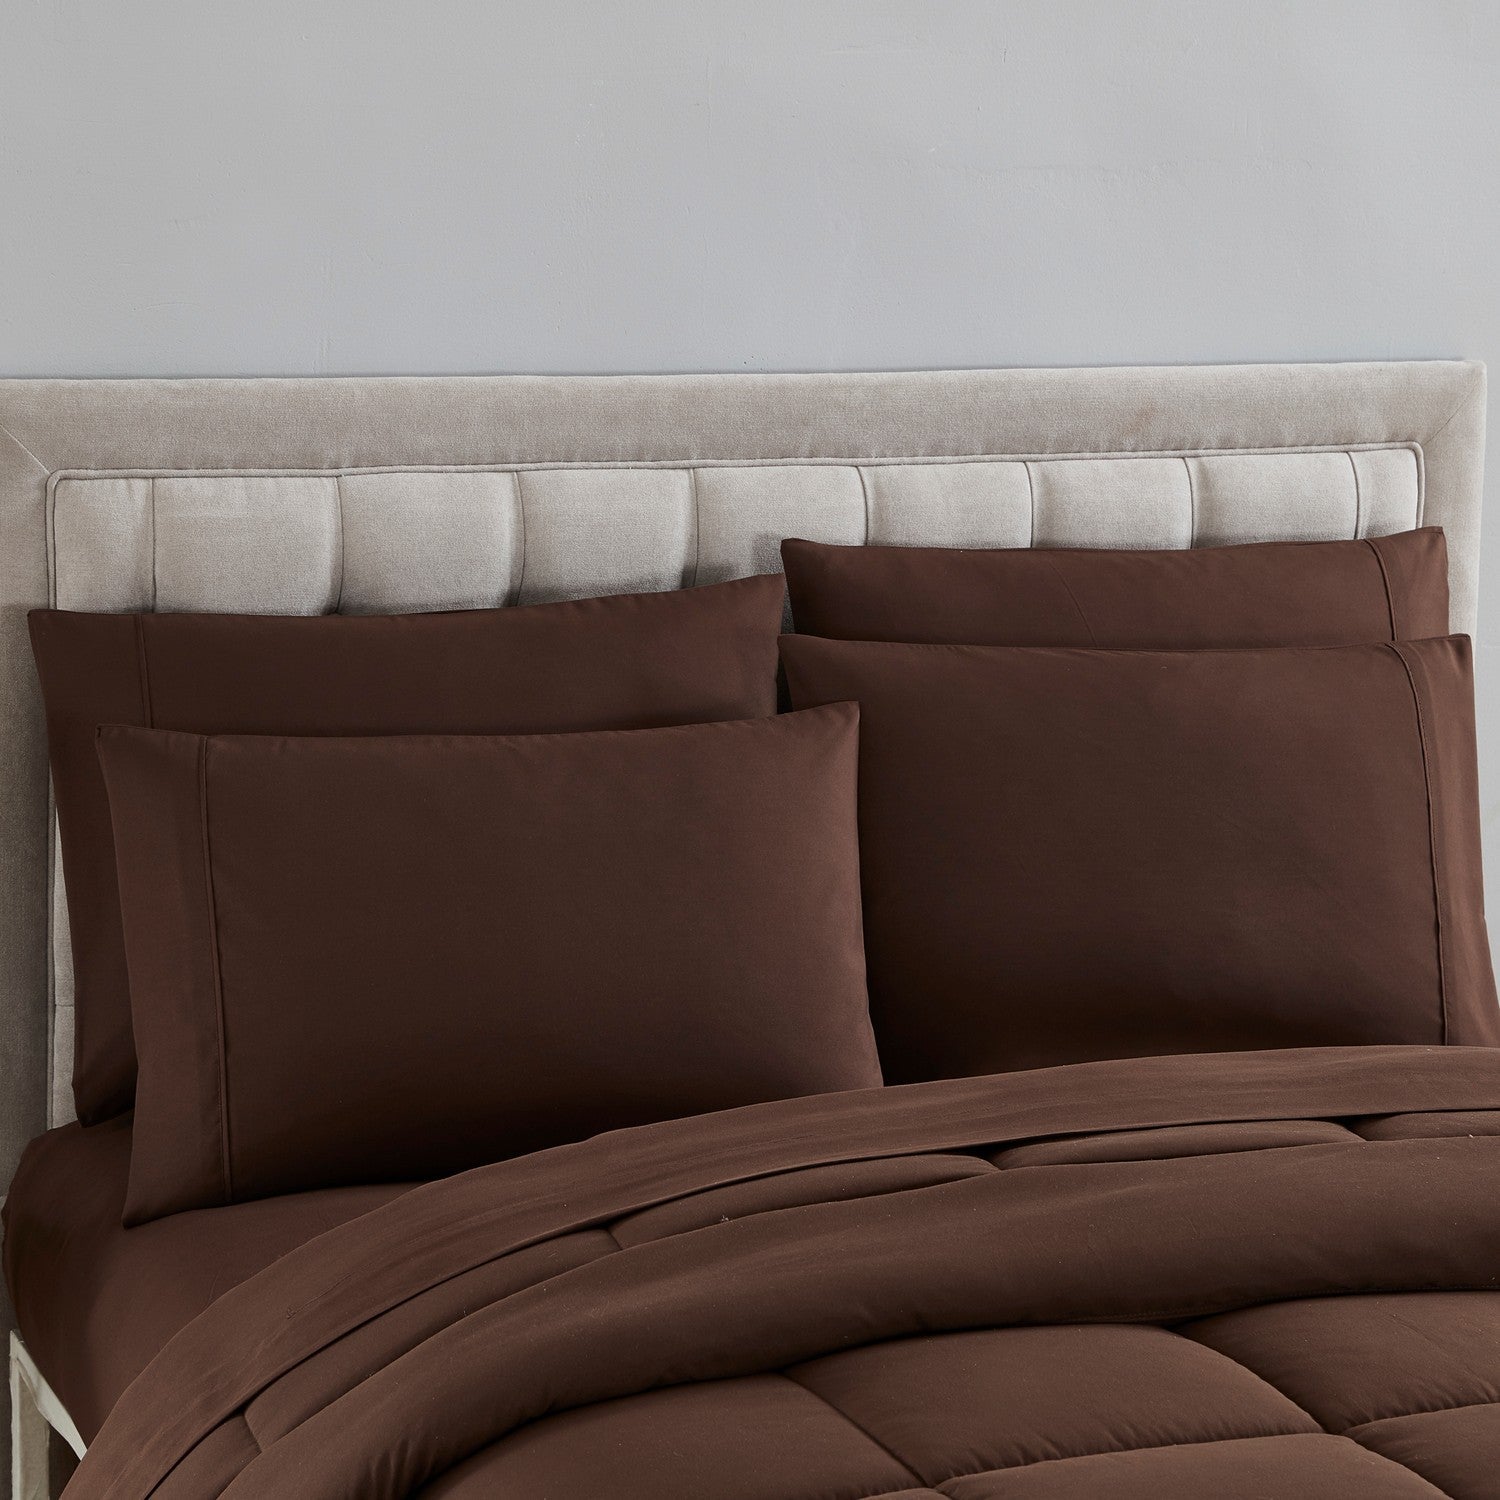 Essential 7-Piece Bed in a Bag Set Chocolate - Shams